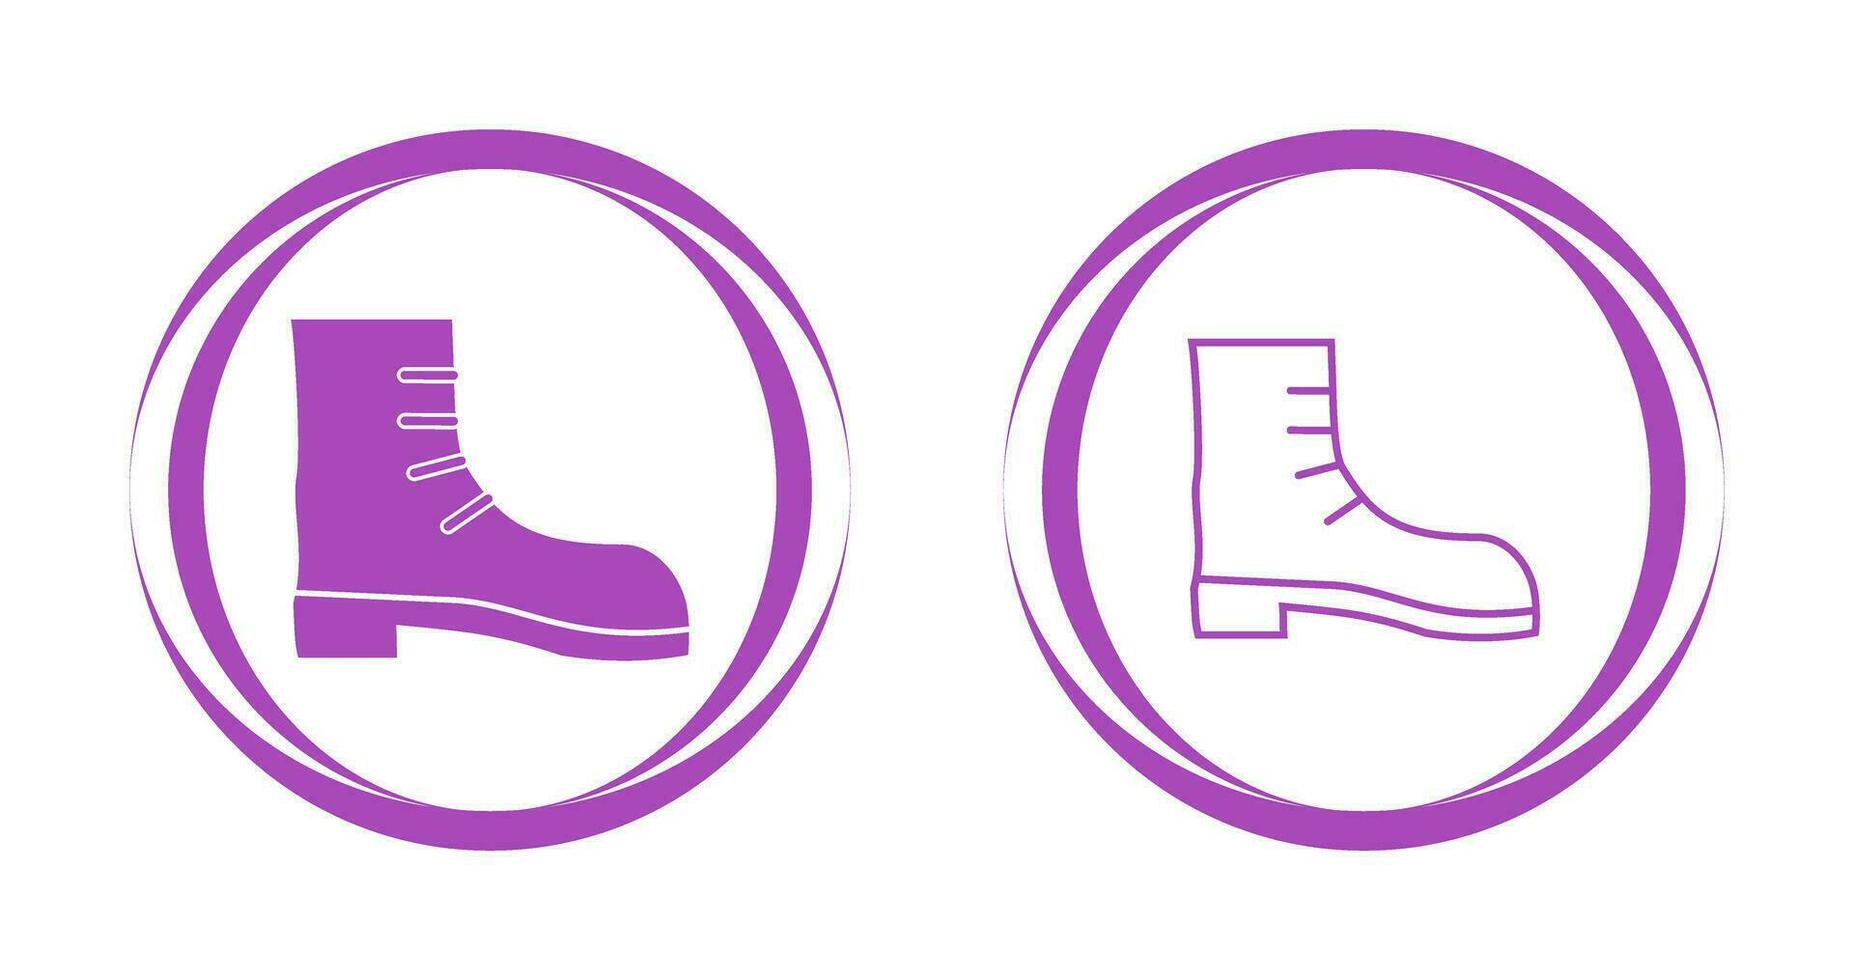 Camping Boot Vector Icon